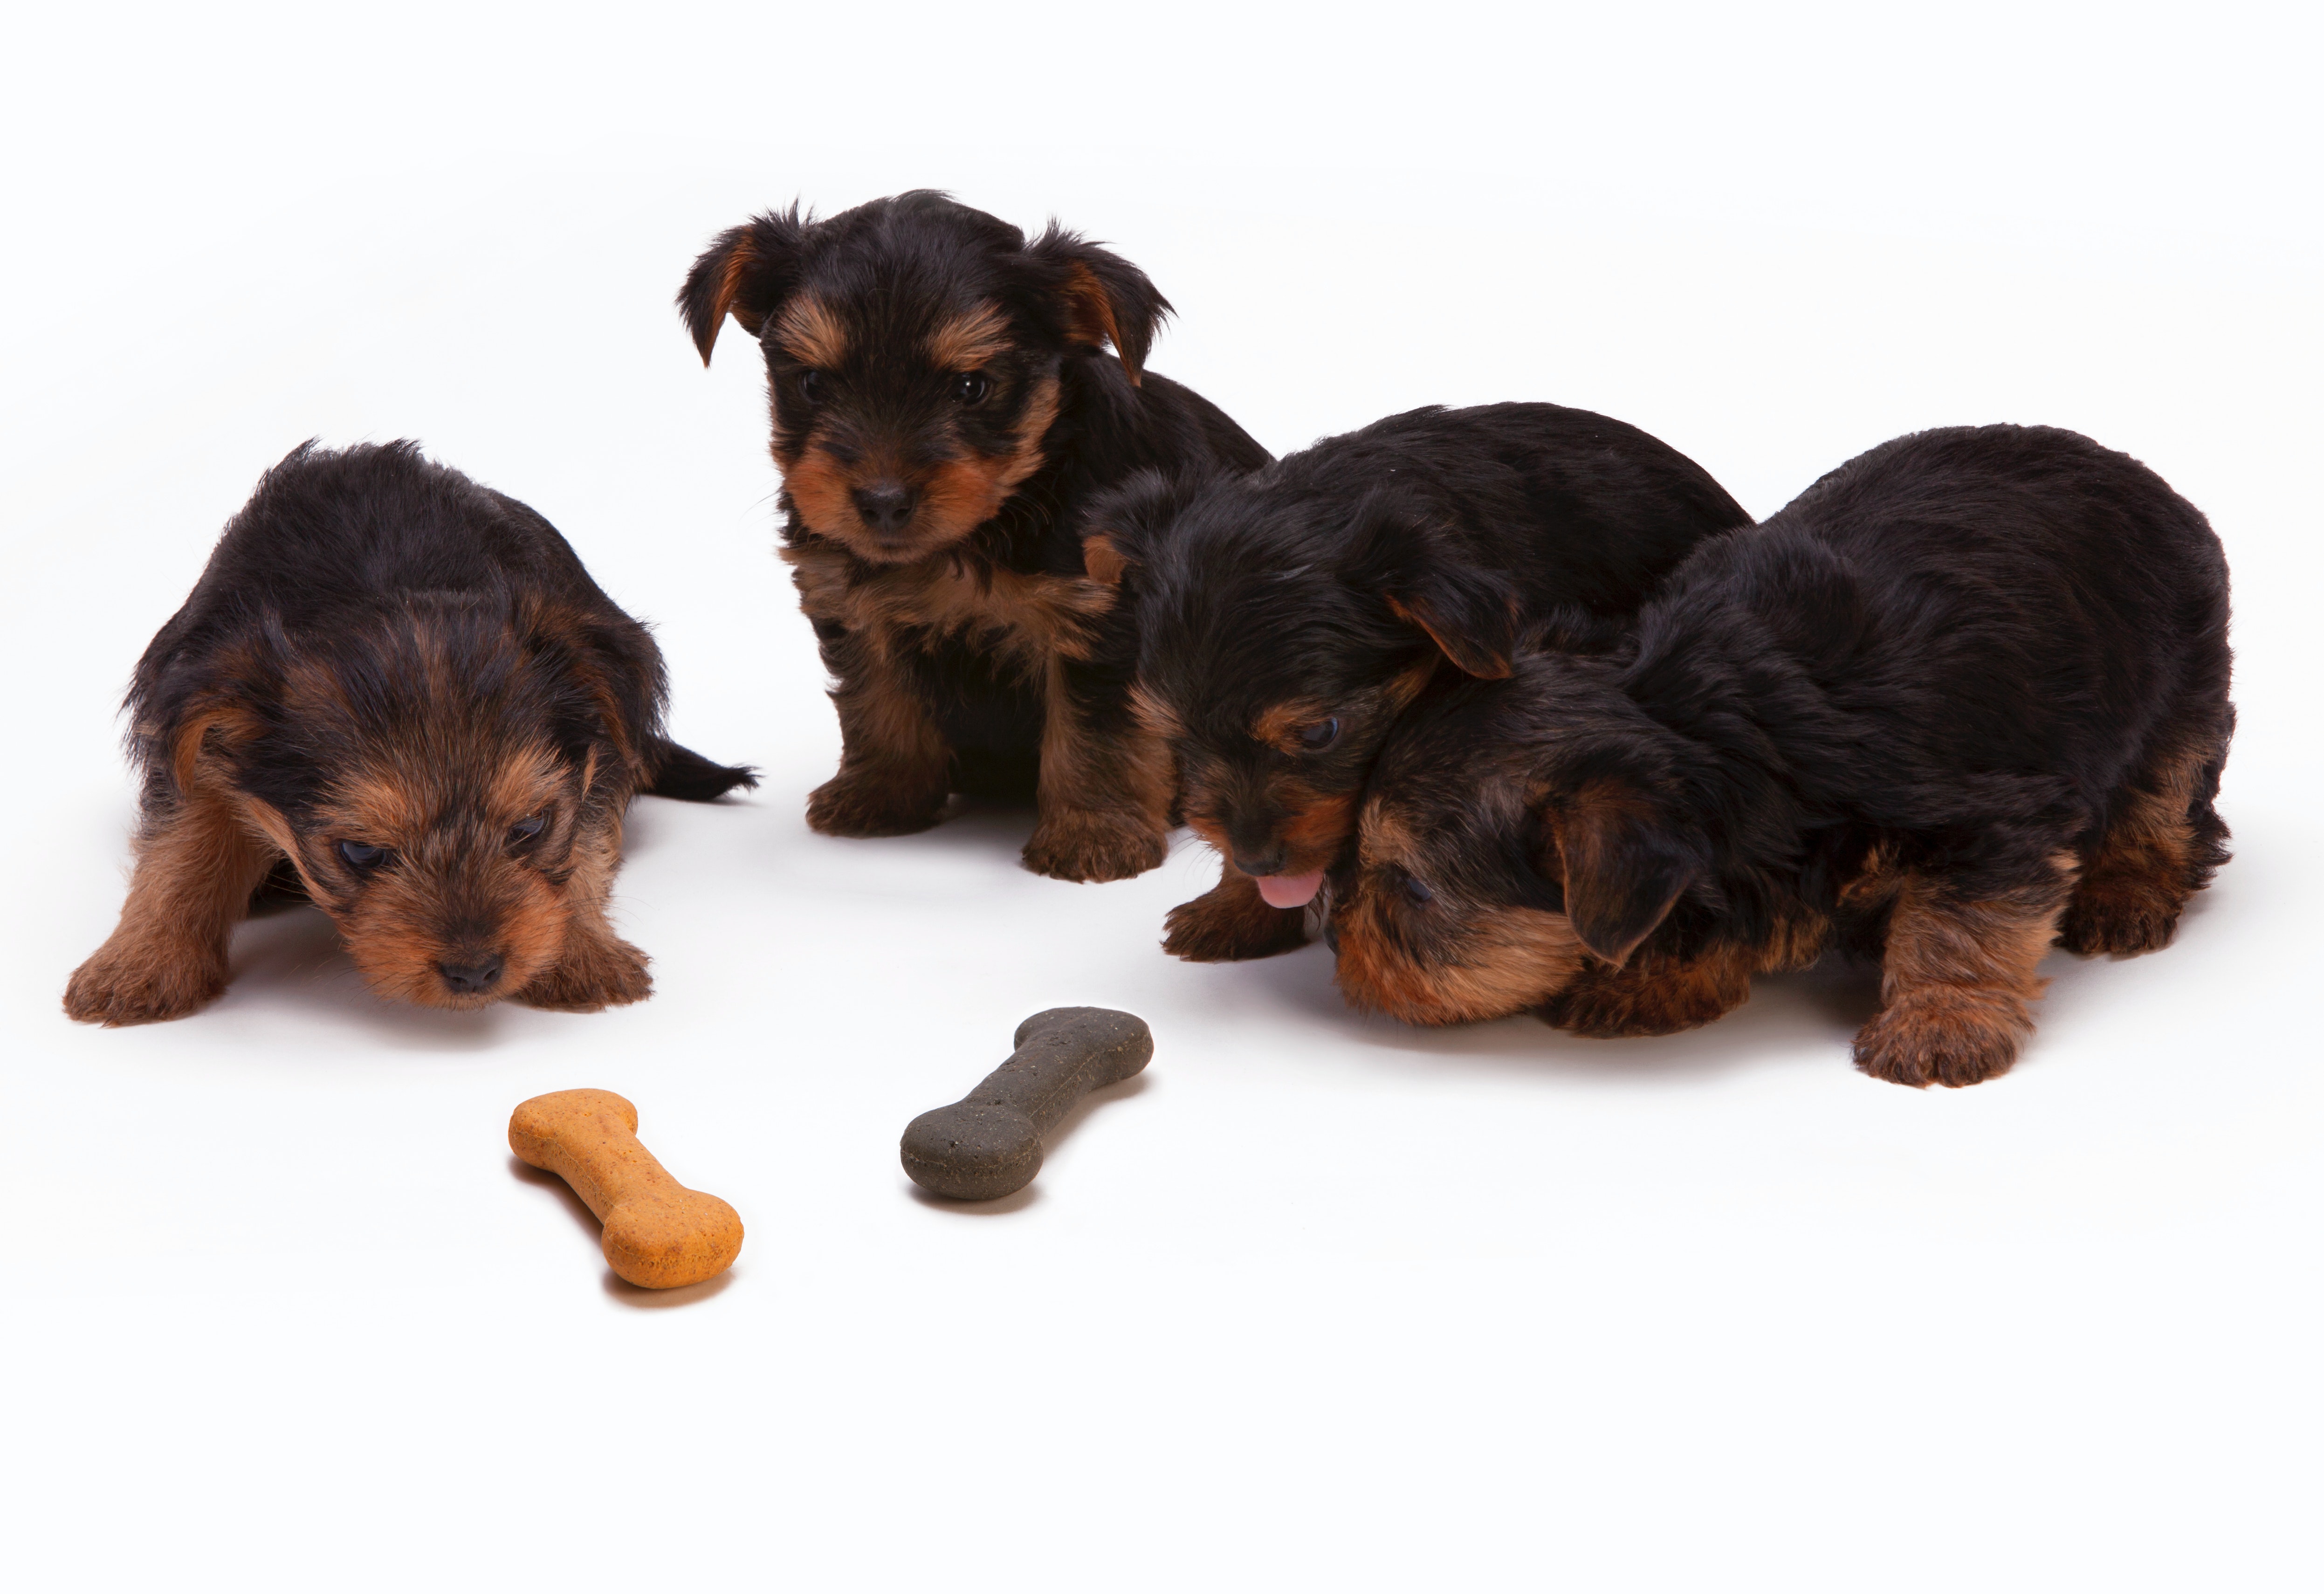 Four adorable Yorkie puppies playing with a bone, their eyes gleaming with excitement as they spot two delicious dog biscuits nearby.